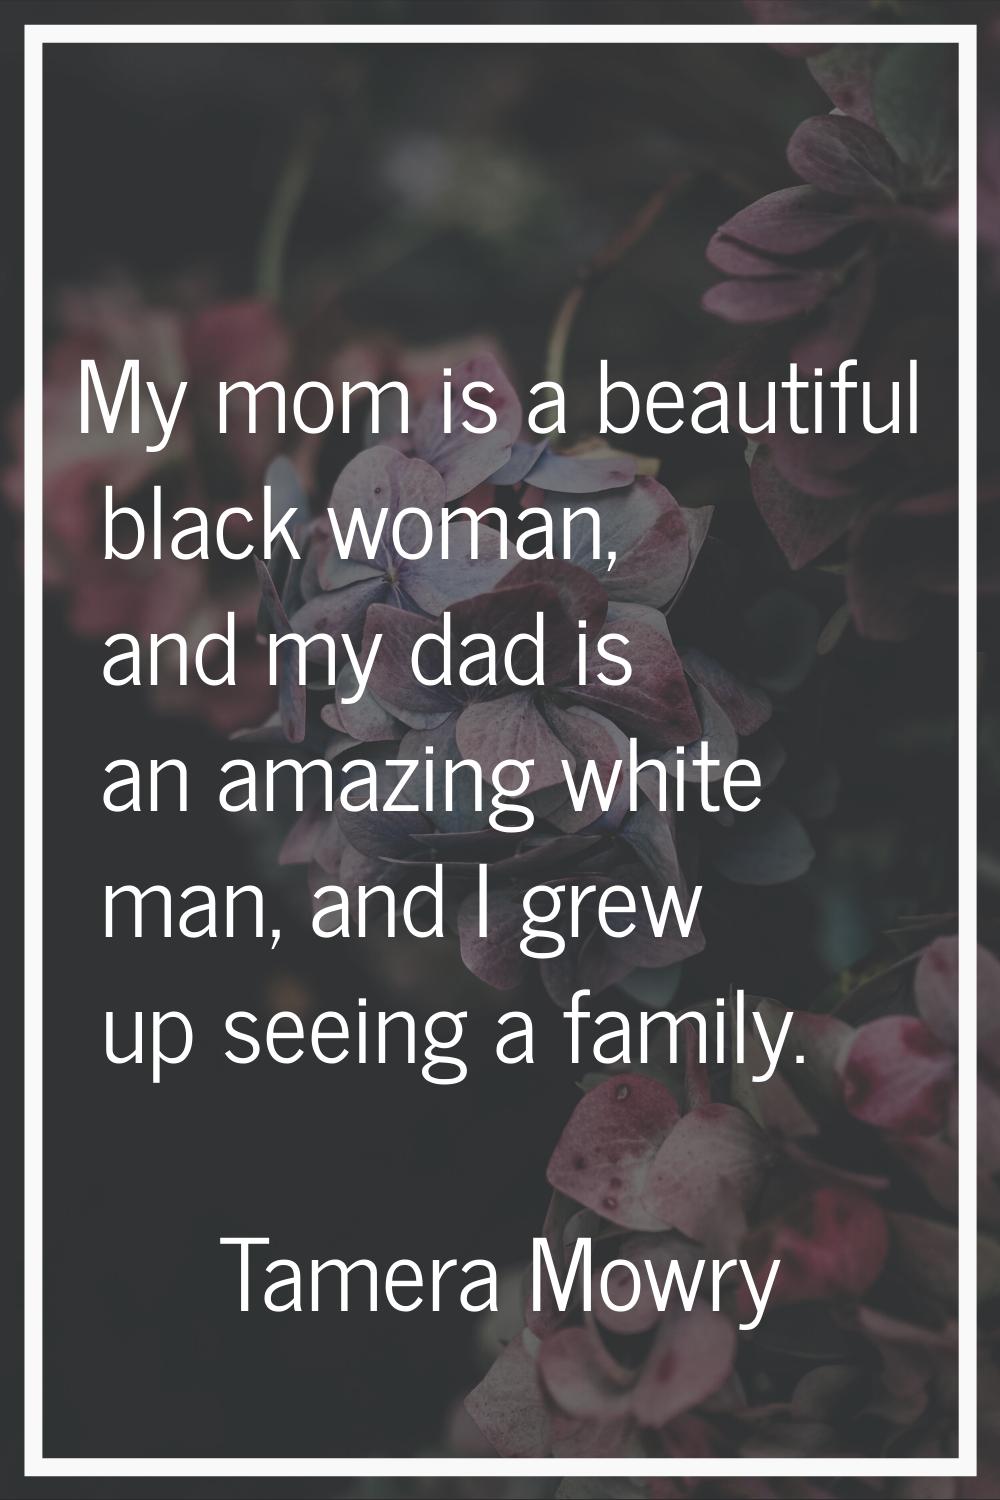 My mom is a beautiful black woman, and my dad is an amazing white man, and I grew up seeing a famil